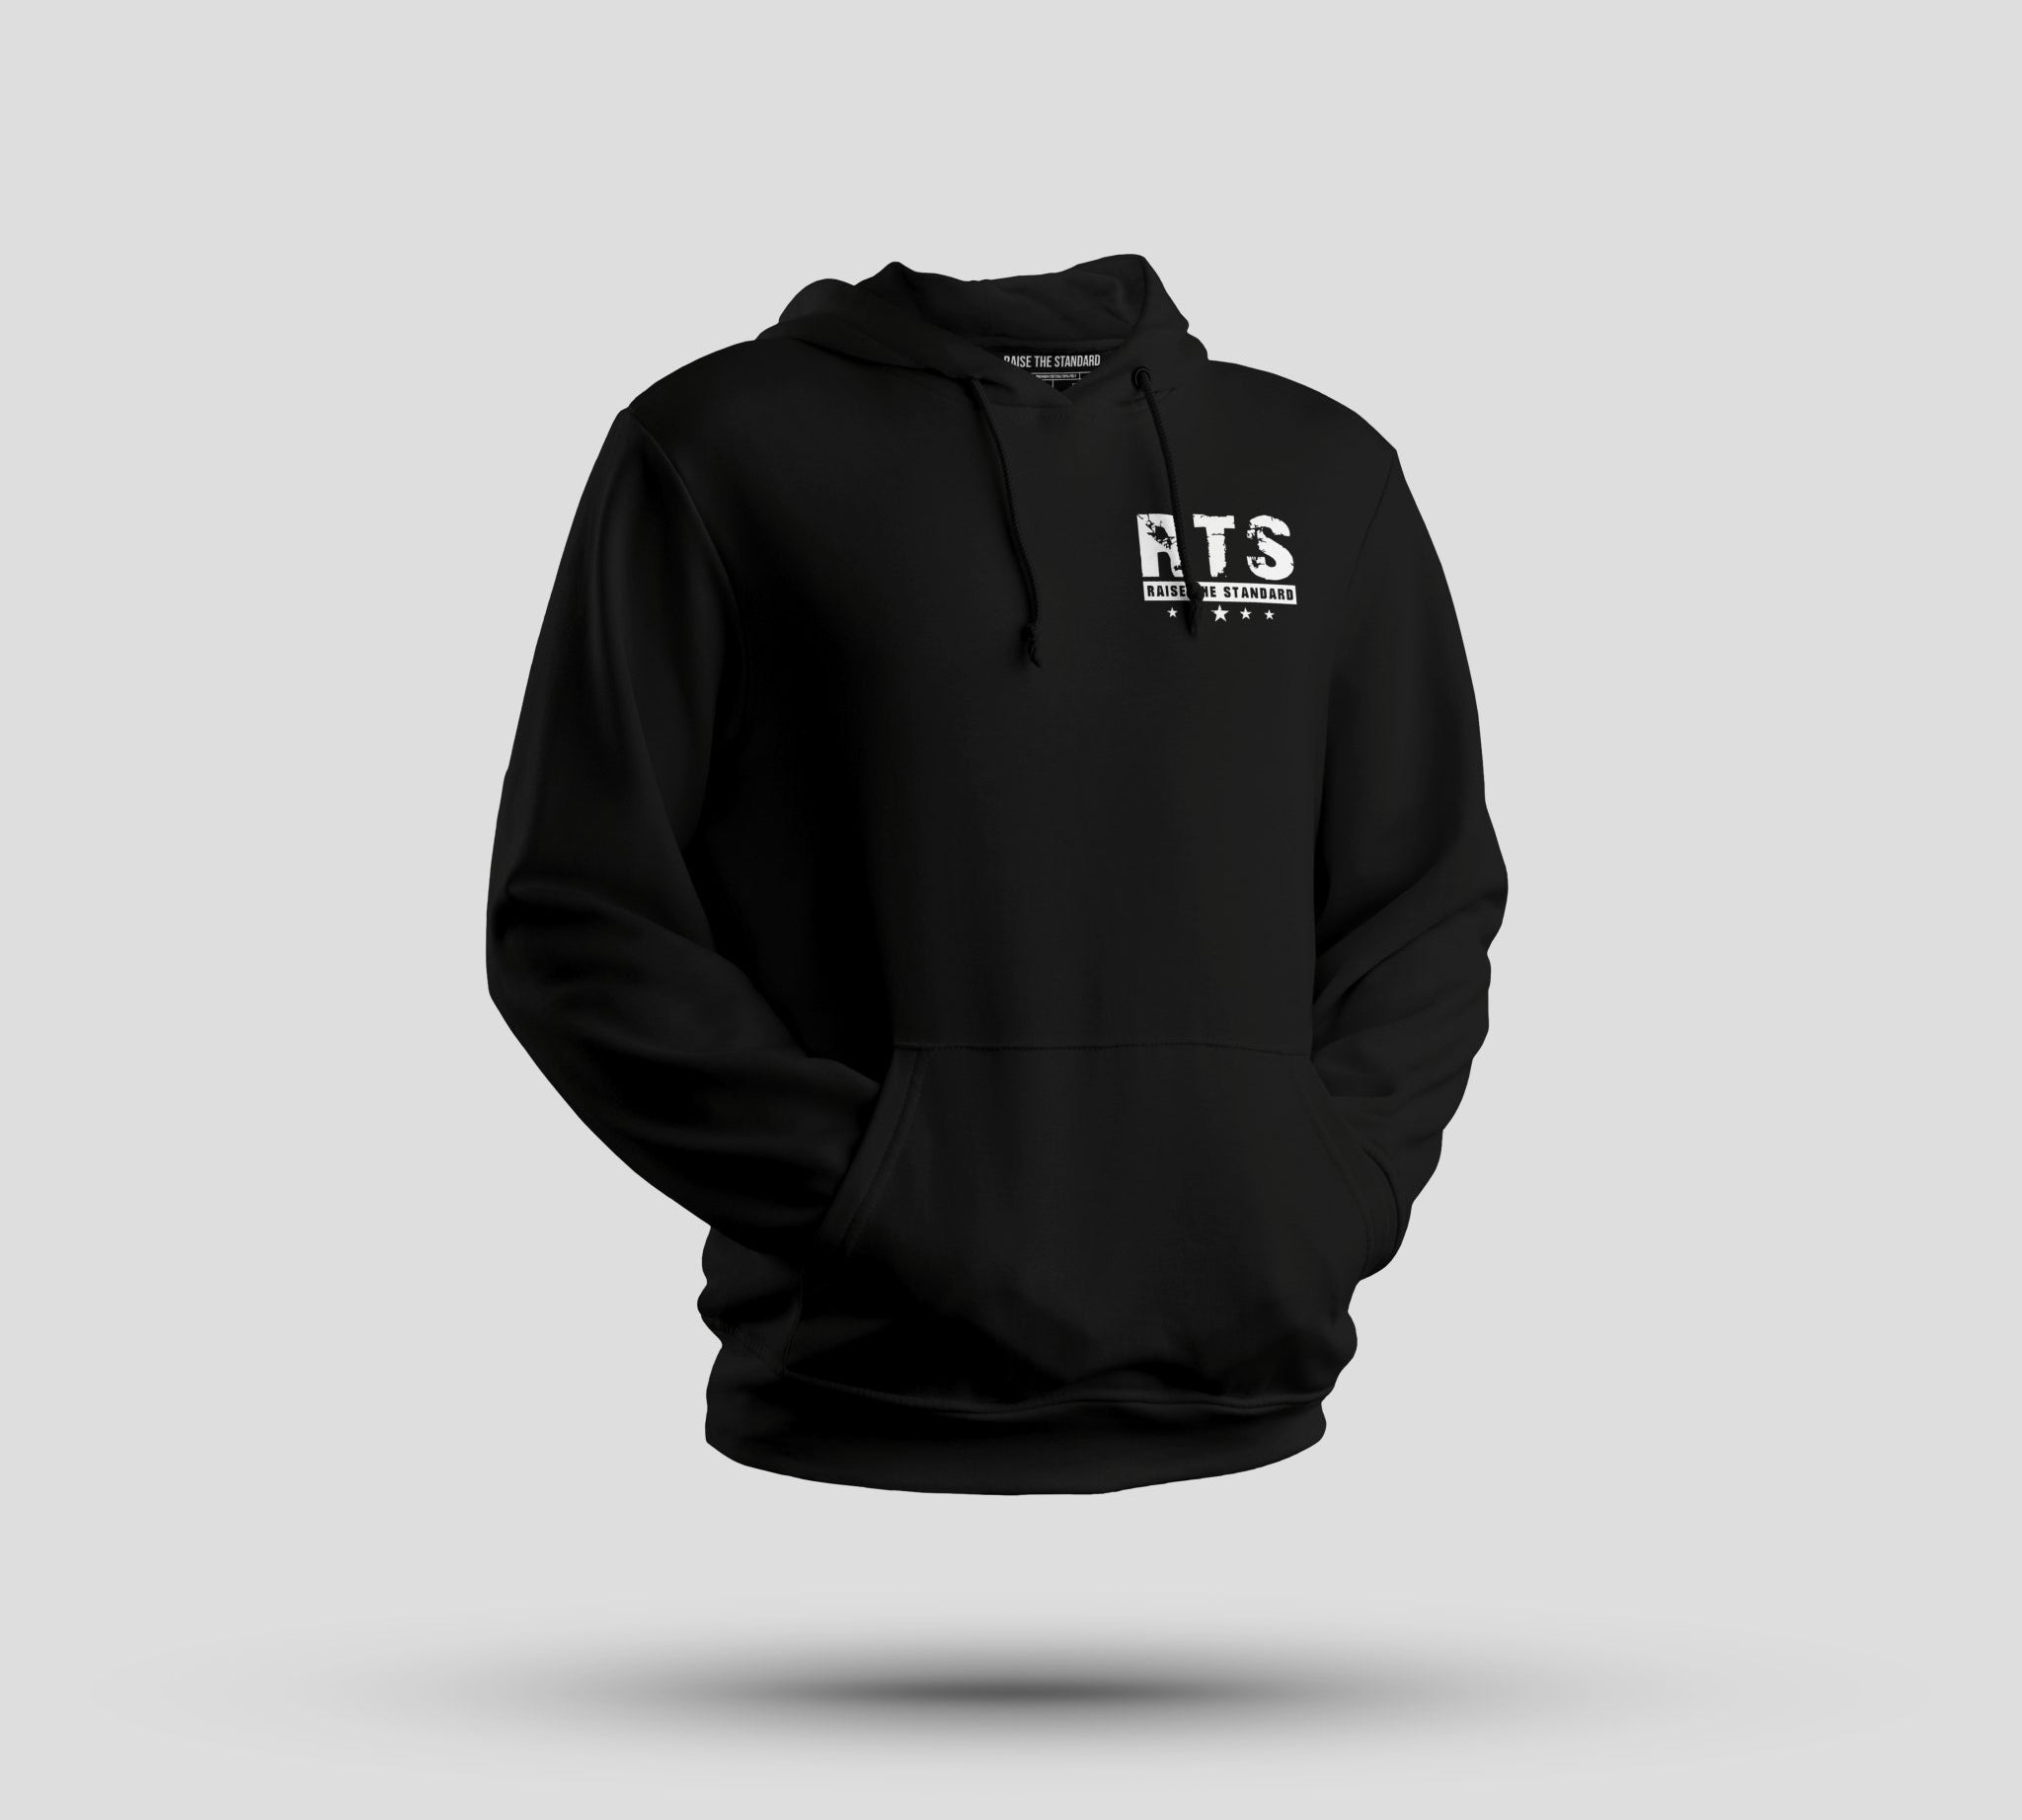 Having A Rough Day? Hoodie - Raise The Standard Apparel